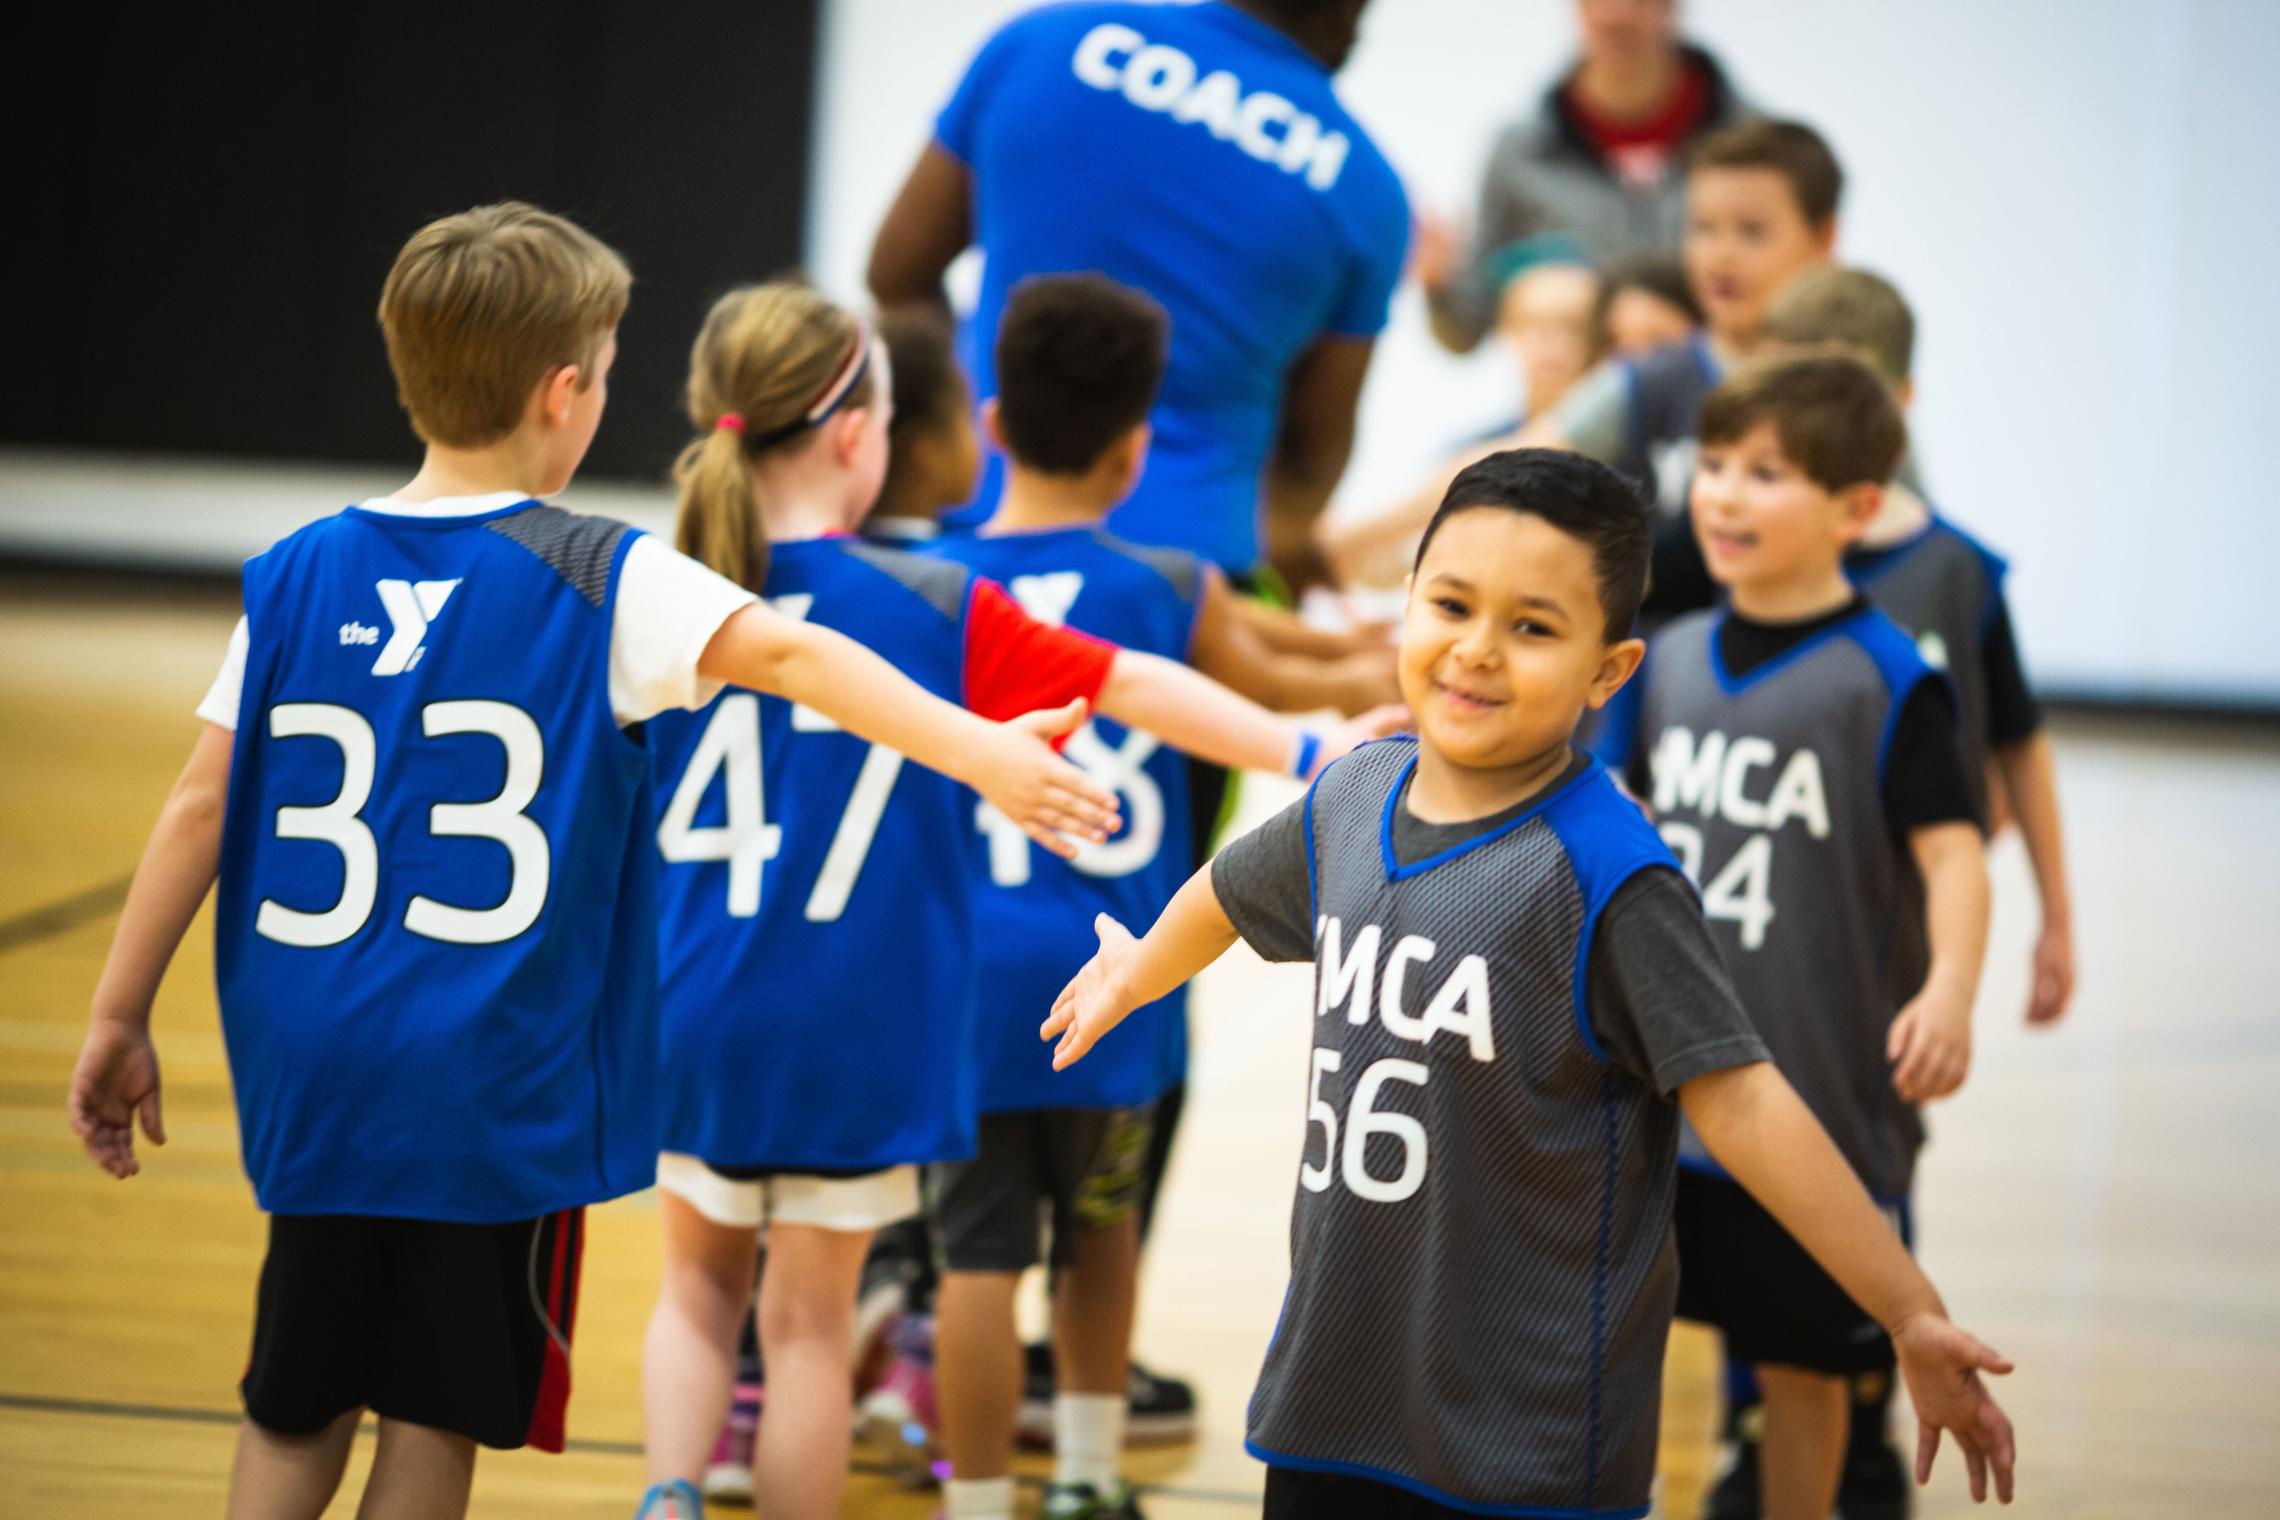 Team Building at YMCA Youth Basketball League